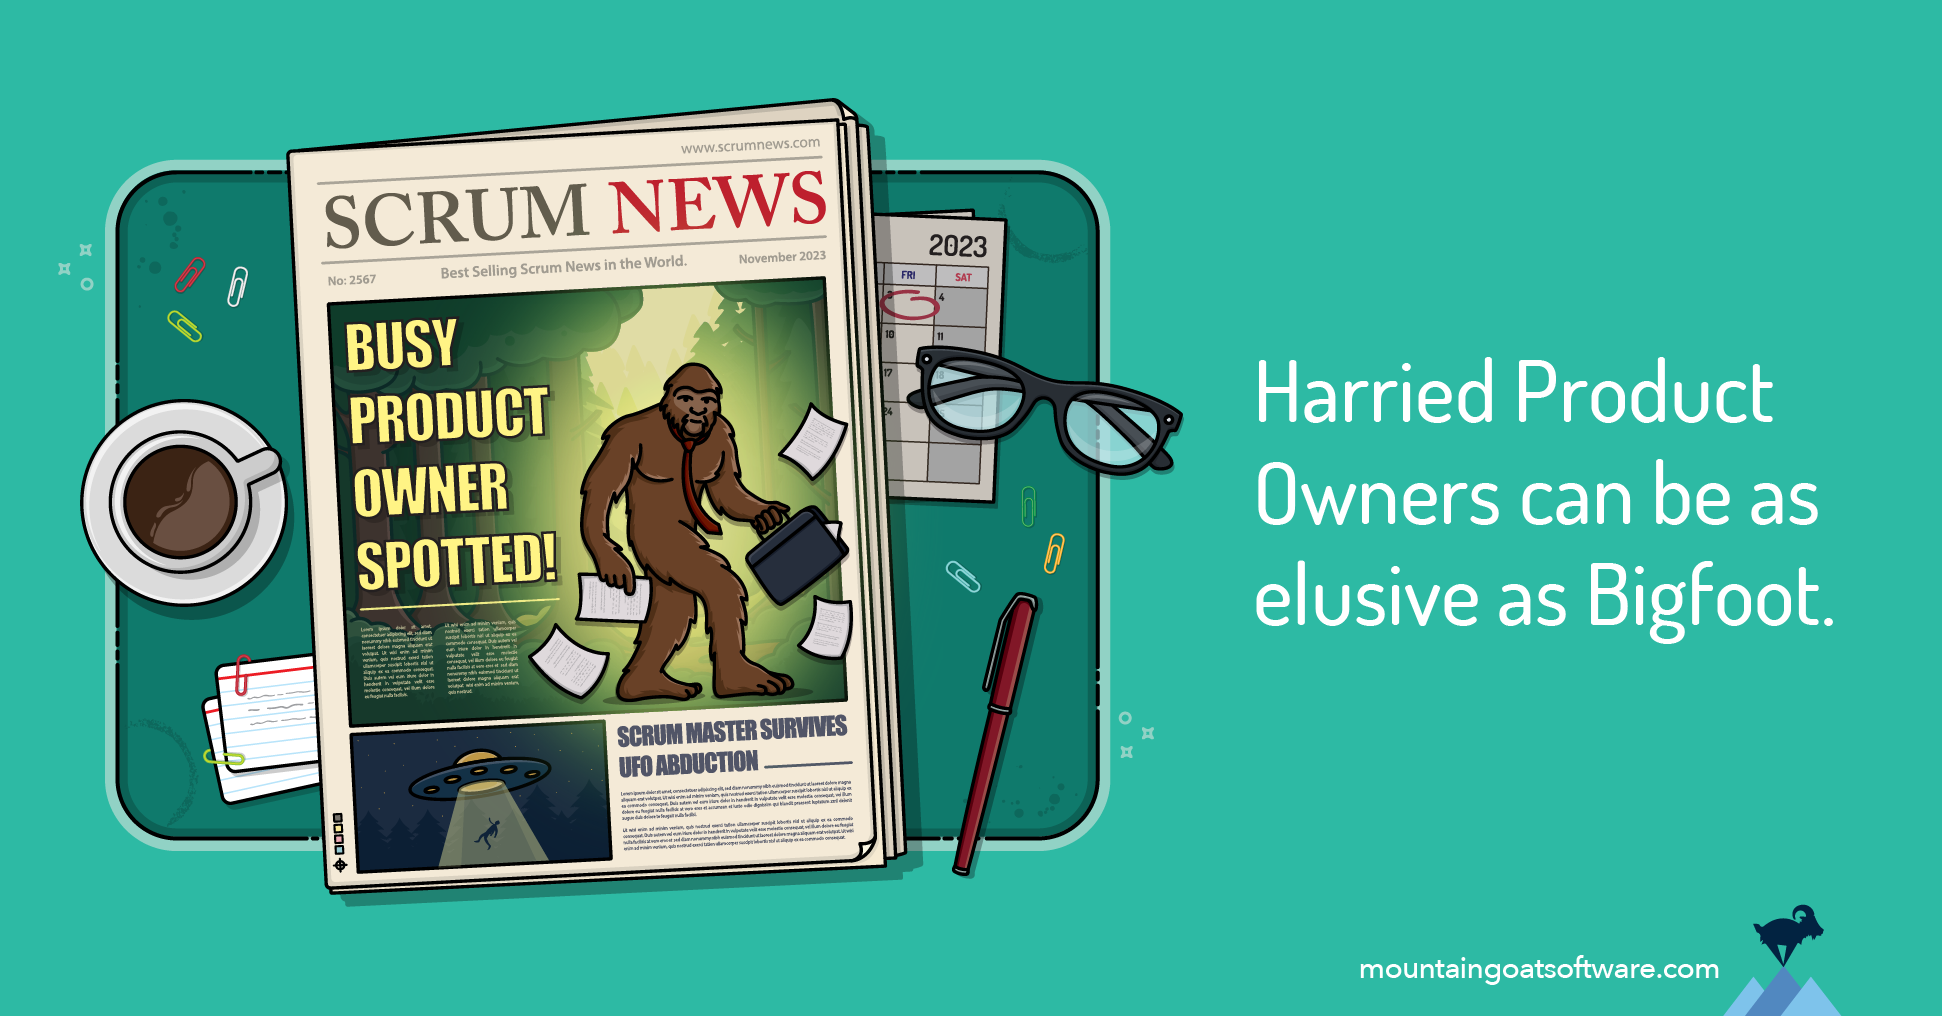 Harried product owners can be as elusive as Bigfoot. An illustration of a work desk shows a copy of Scrum News with the heading